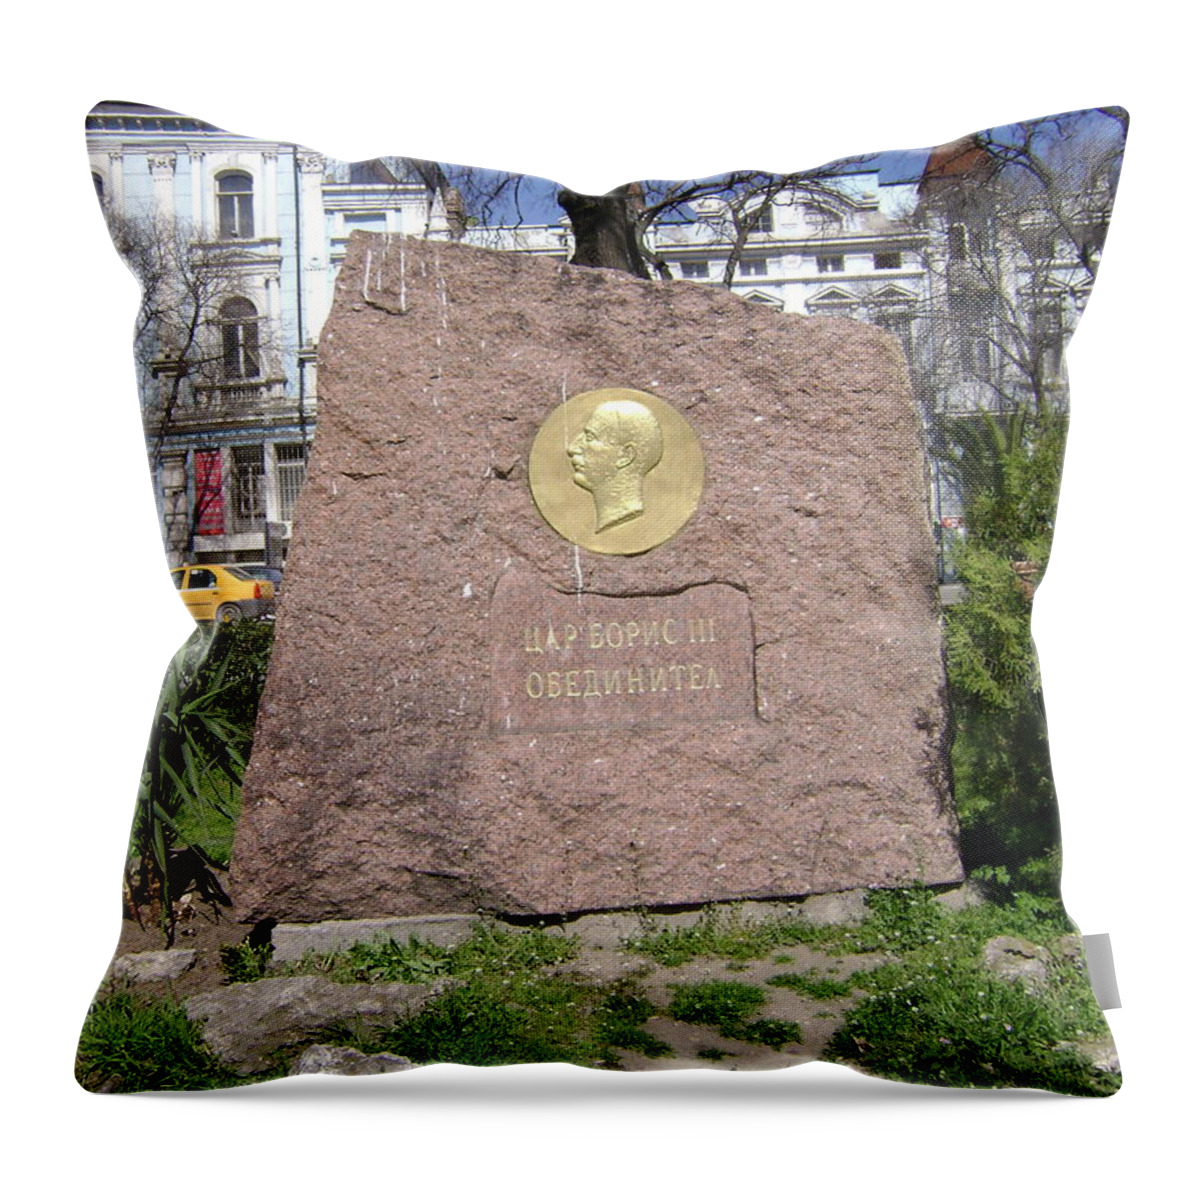 Engraving Throw Pillow featuring the photograph Stone Engraving by Moshe Harboun